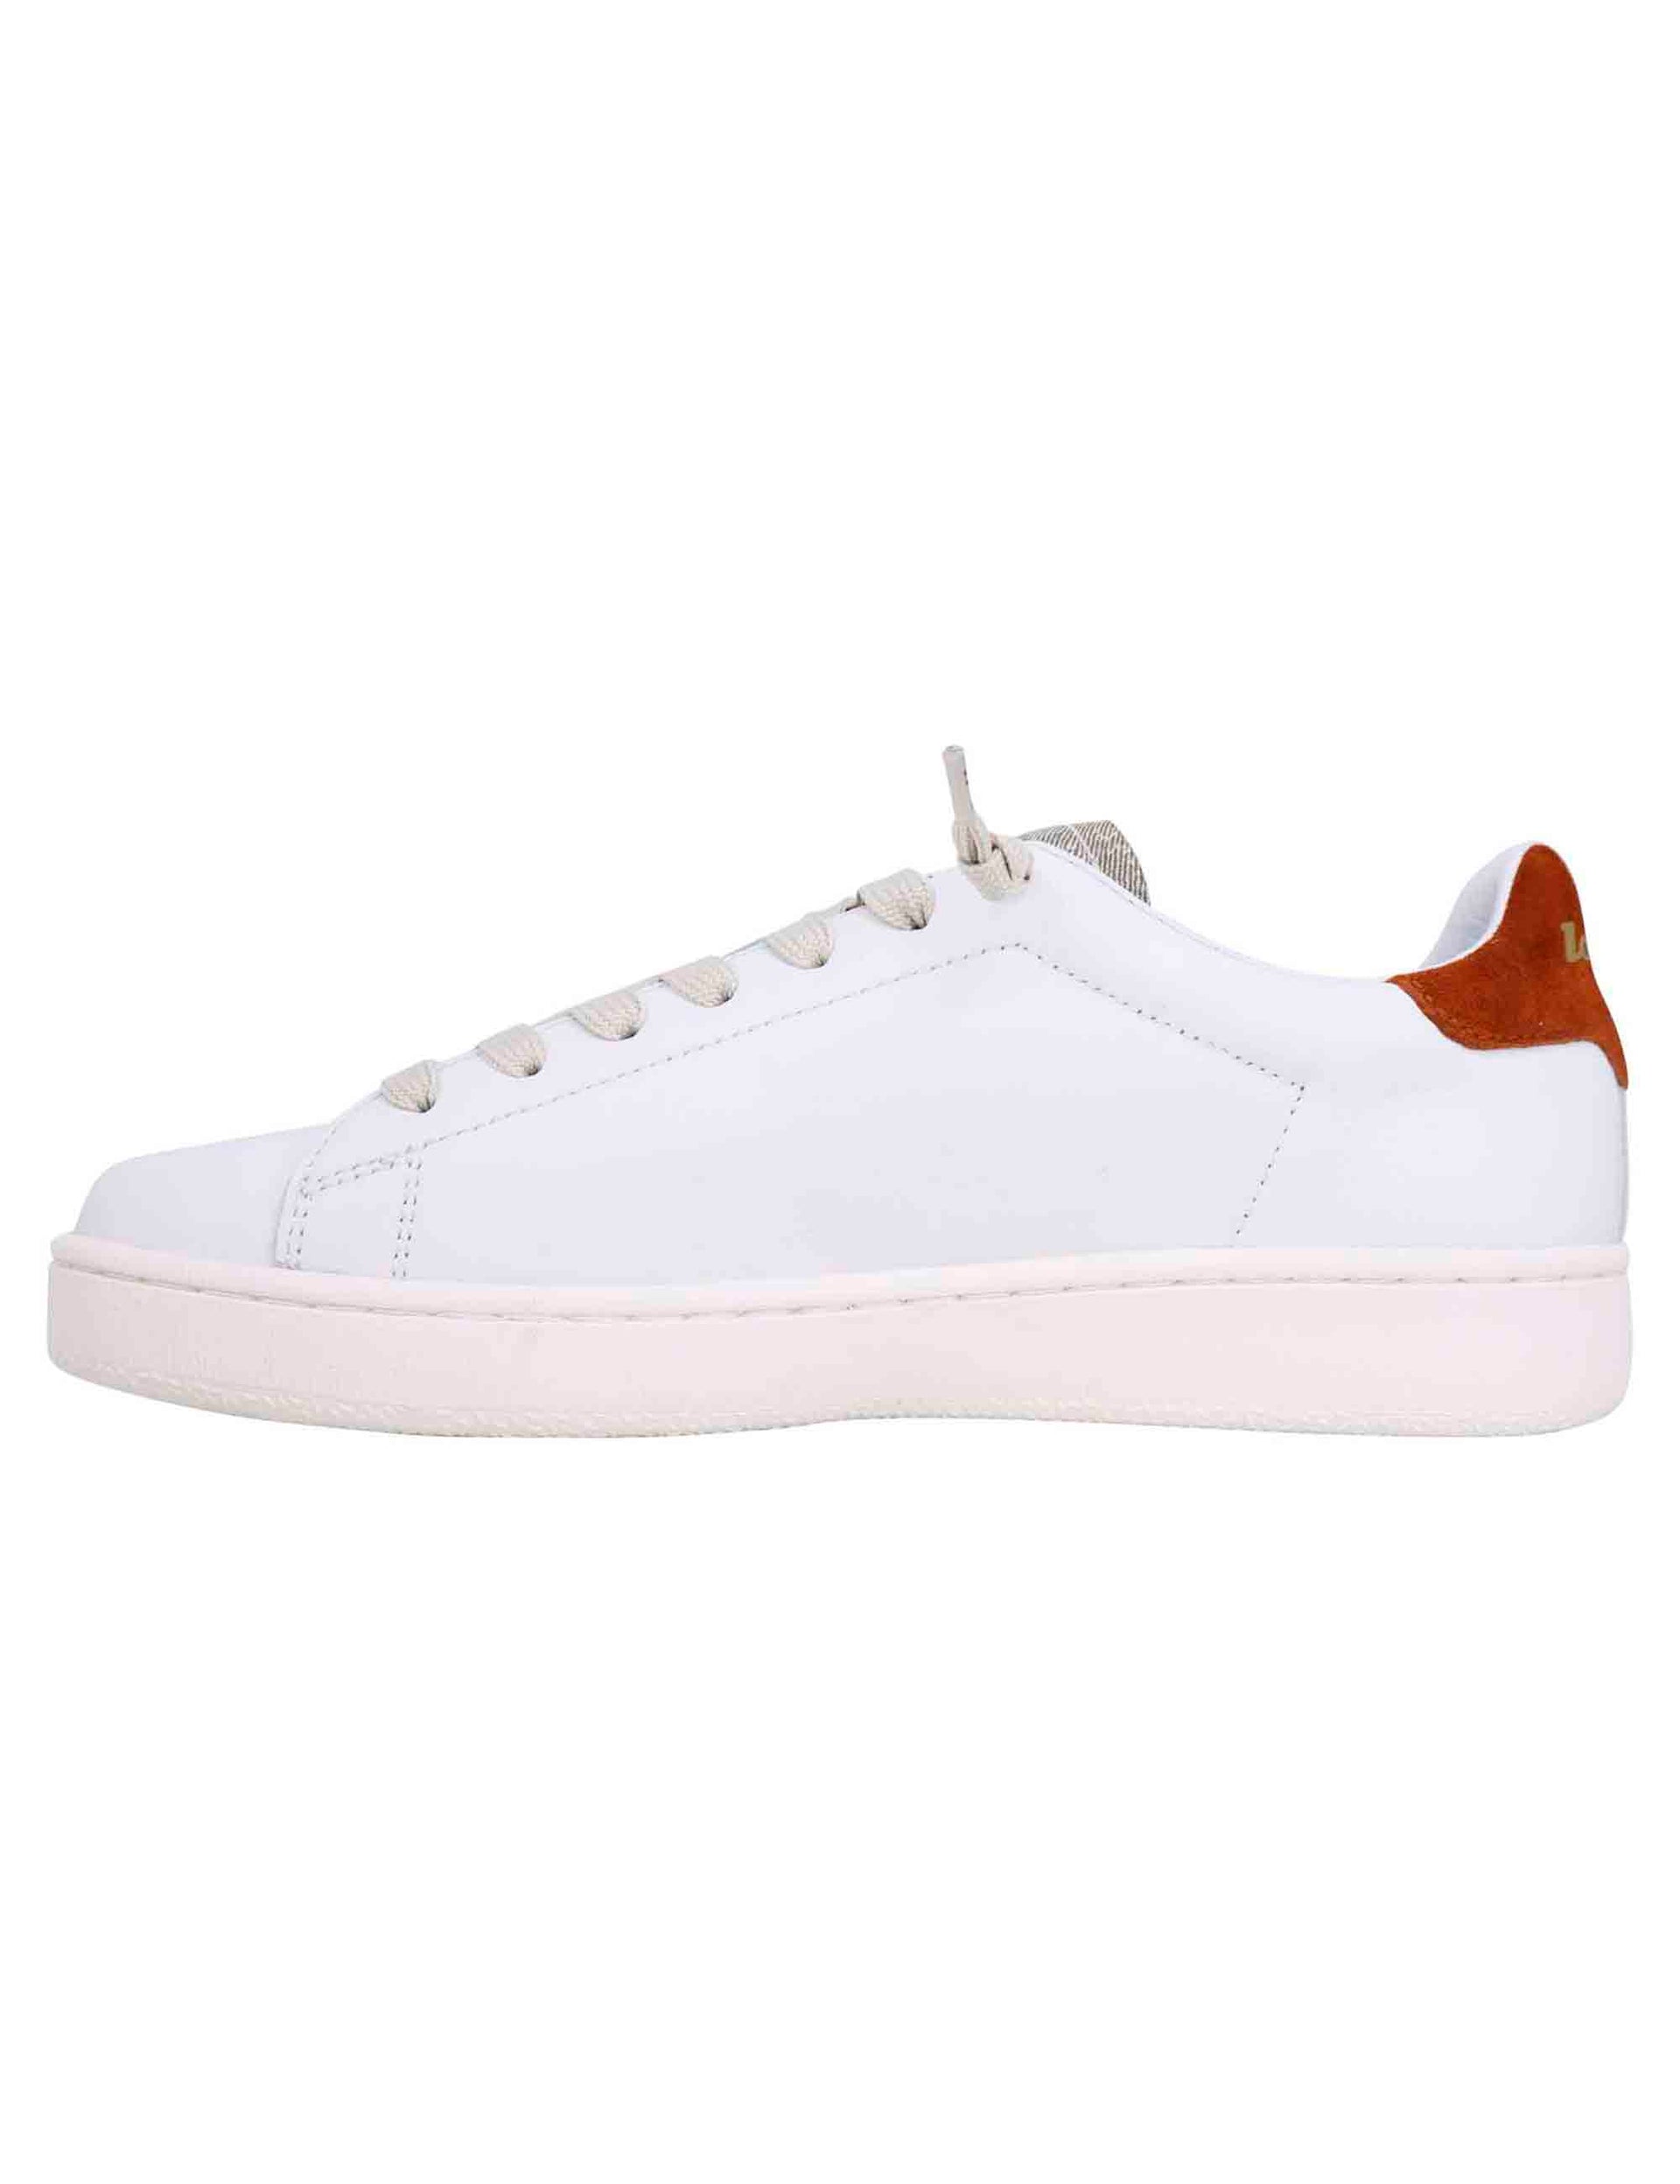 Men's autograph white leather sneakers